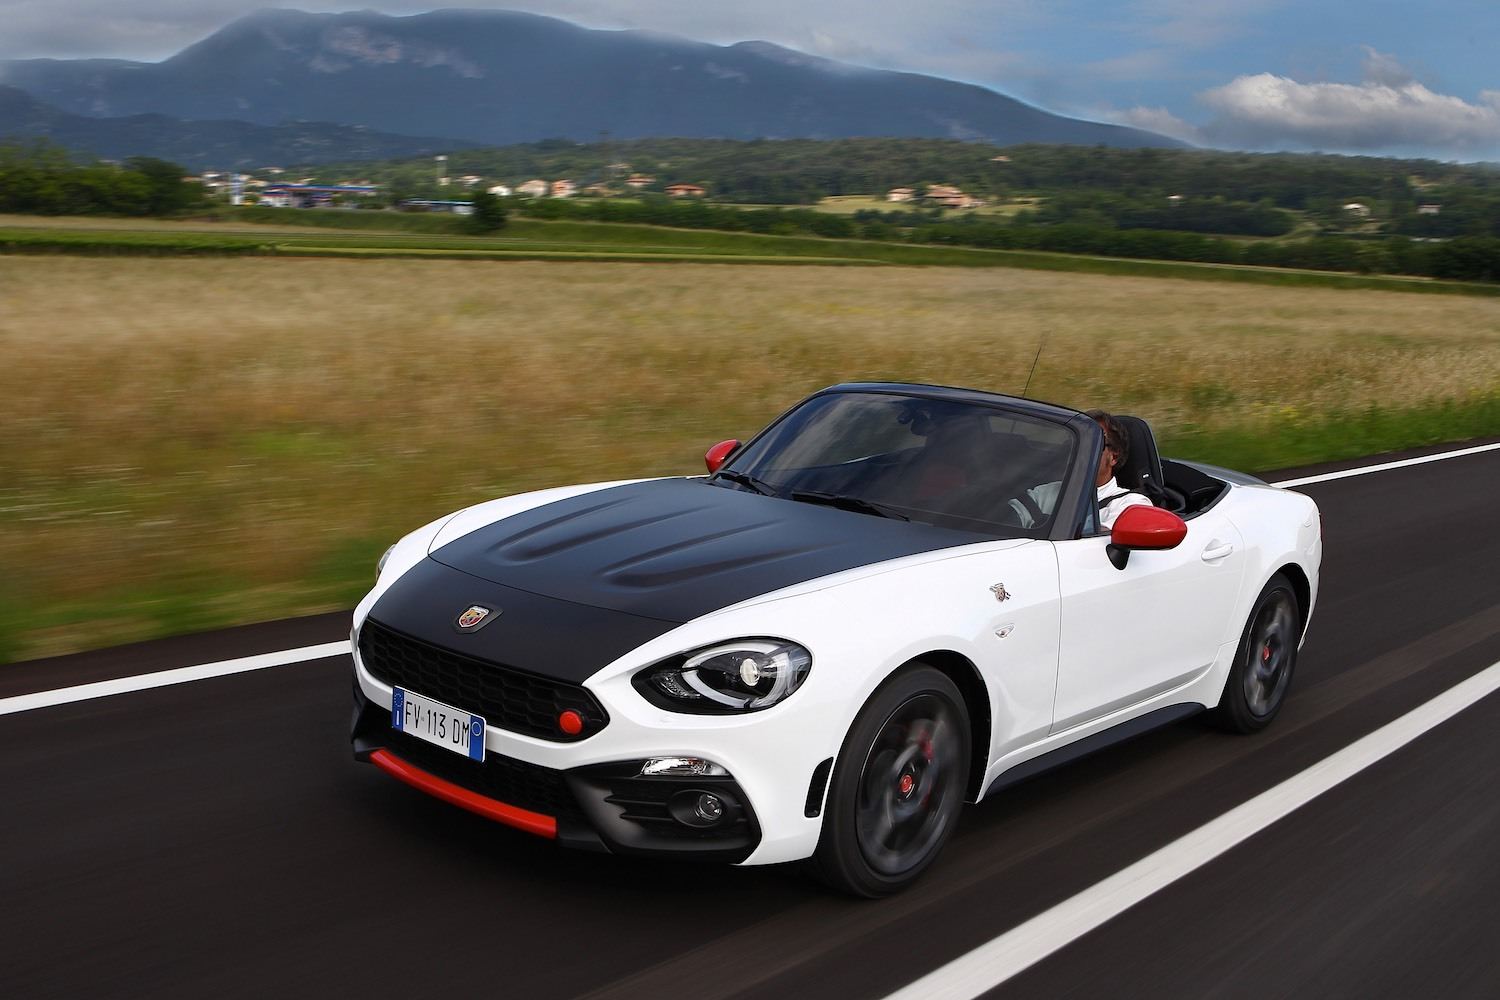 Jonathan Humphrey reviews the Abarth 124 Spider for Drive 10